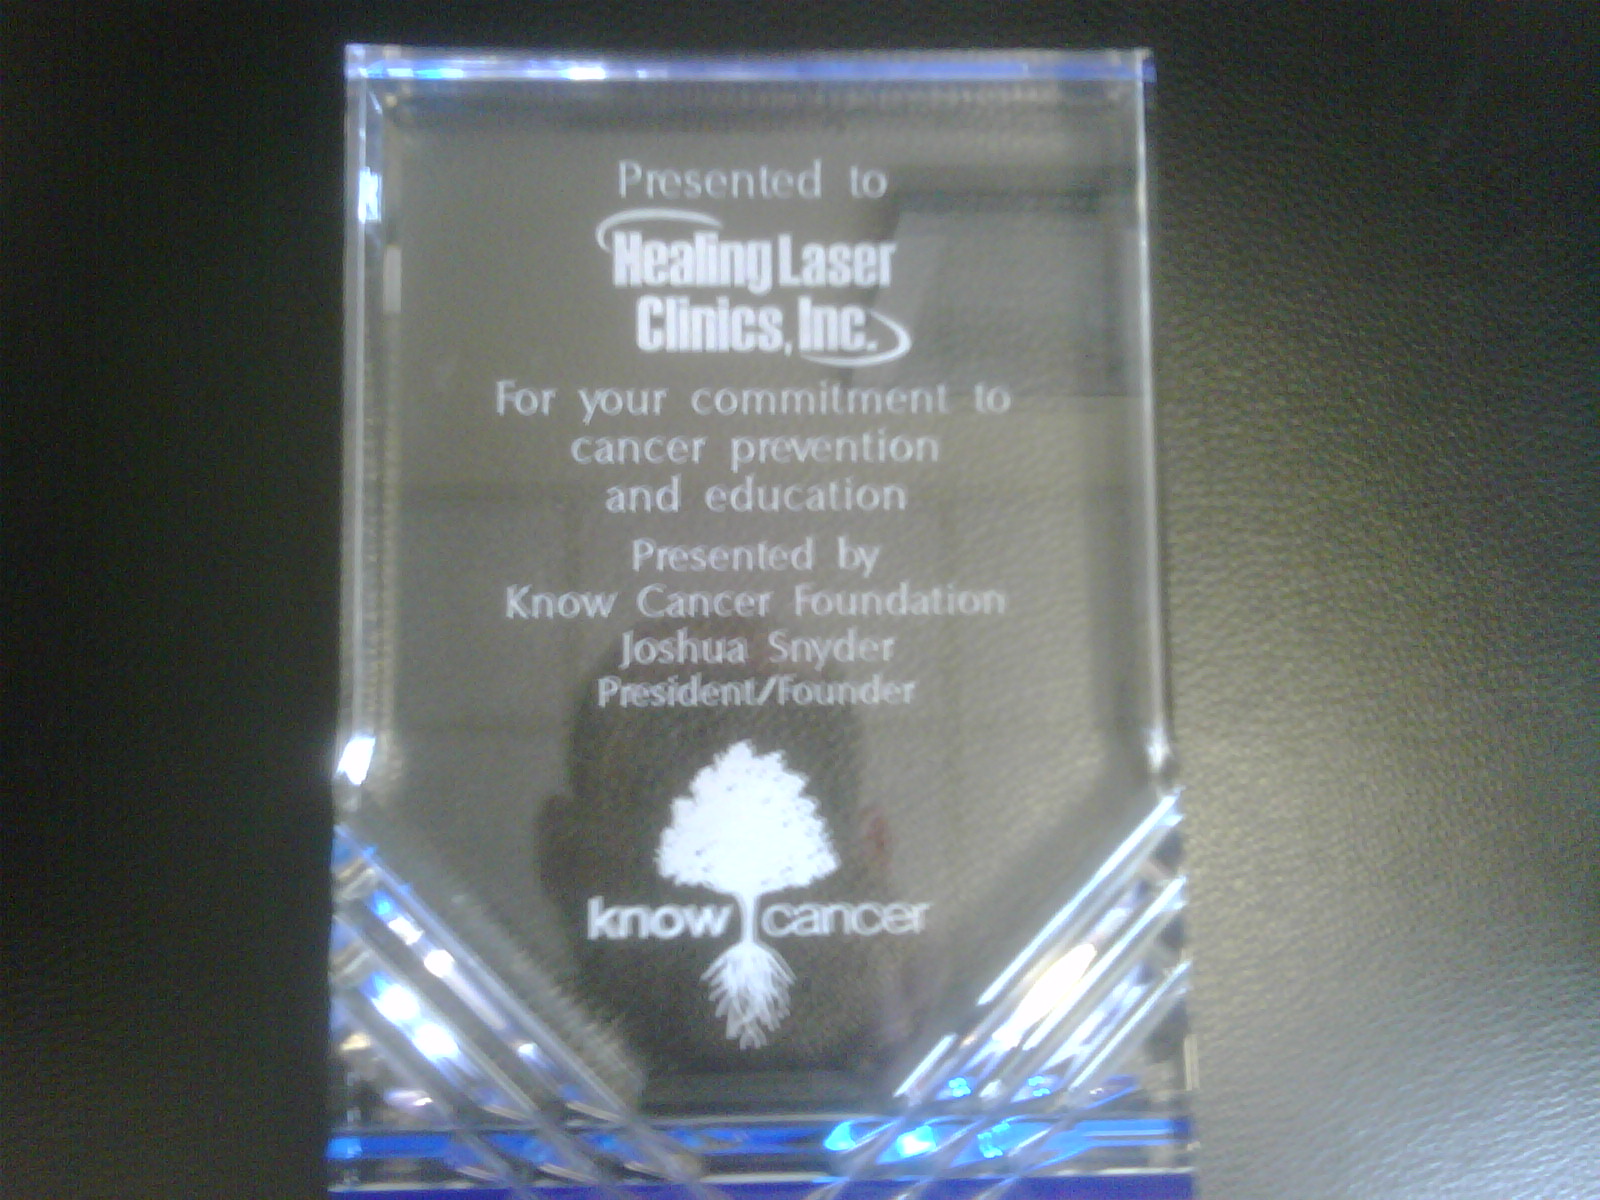 Know Cancer awards Healing Laser Clinics for thier committment to cancer prevention and education!